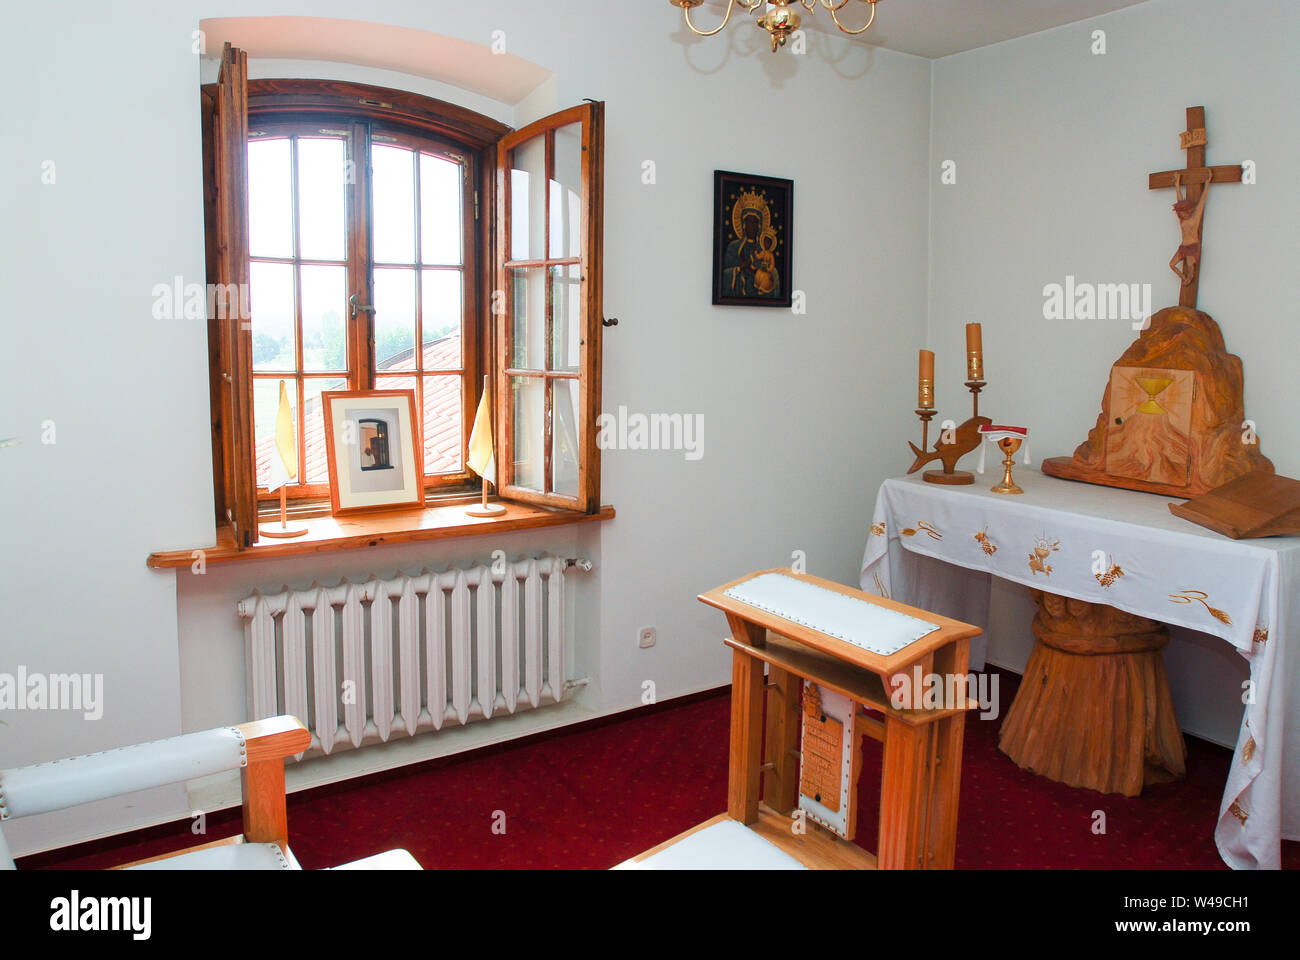 Pope John Paul II room in Former Baroque Camaldolese hermitage built in XVIII century in Wigry, Poland, during his pastoral trip to Poland in 1999. Ju Stock Photo